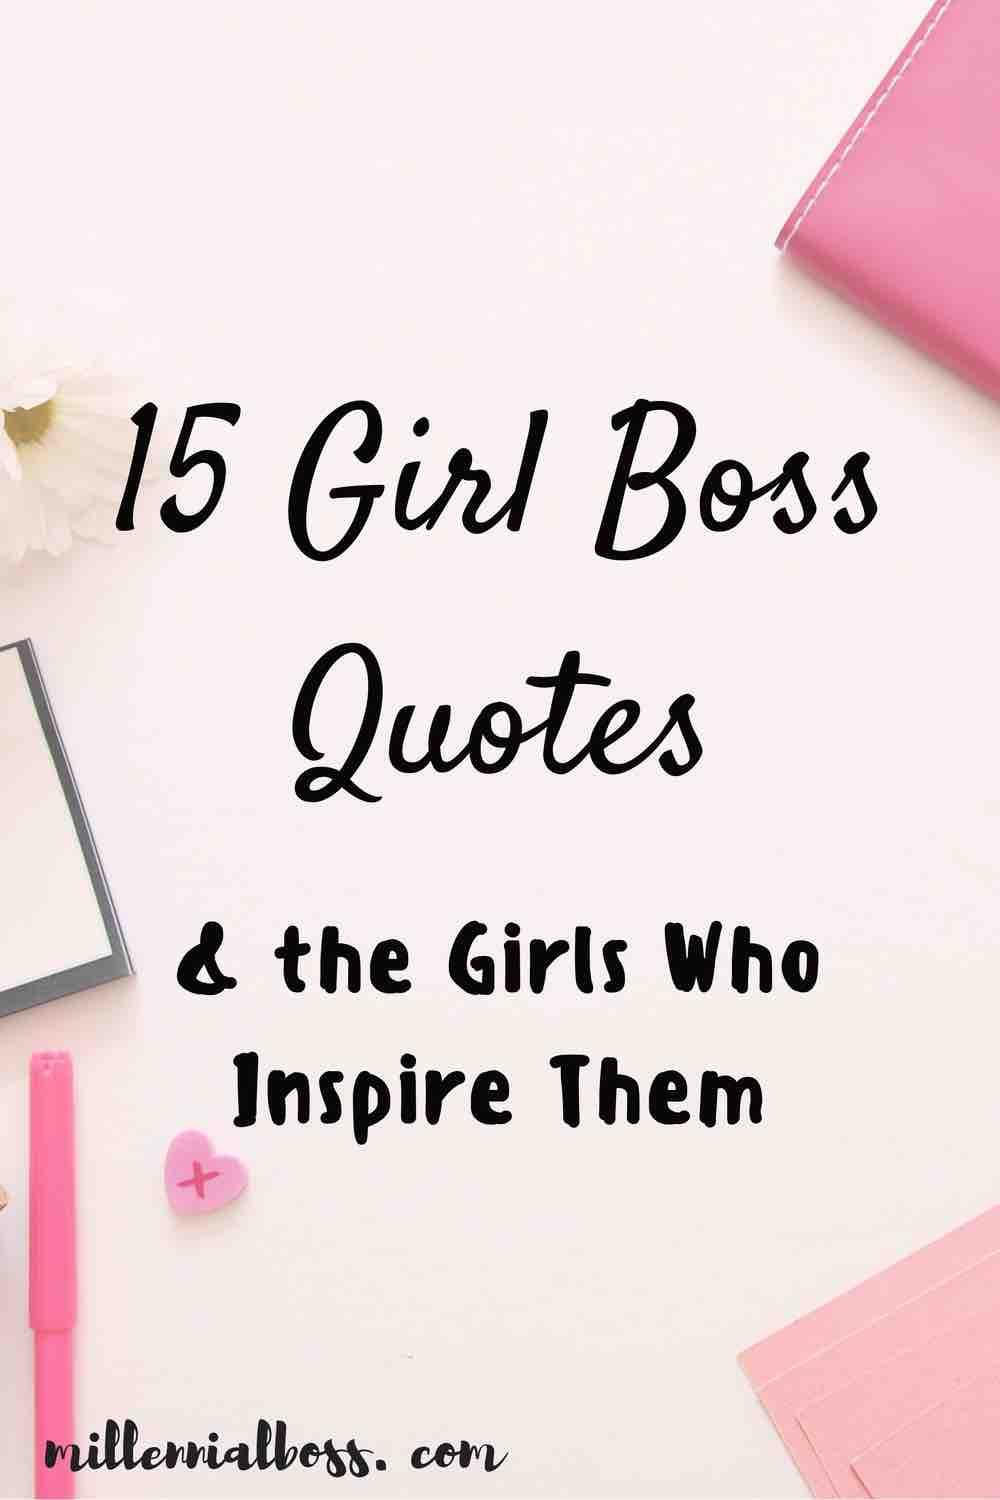 Inspirational Quotes For Girls
 15 Girl Boss Quotes & the Girls Who Inspire Them